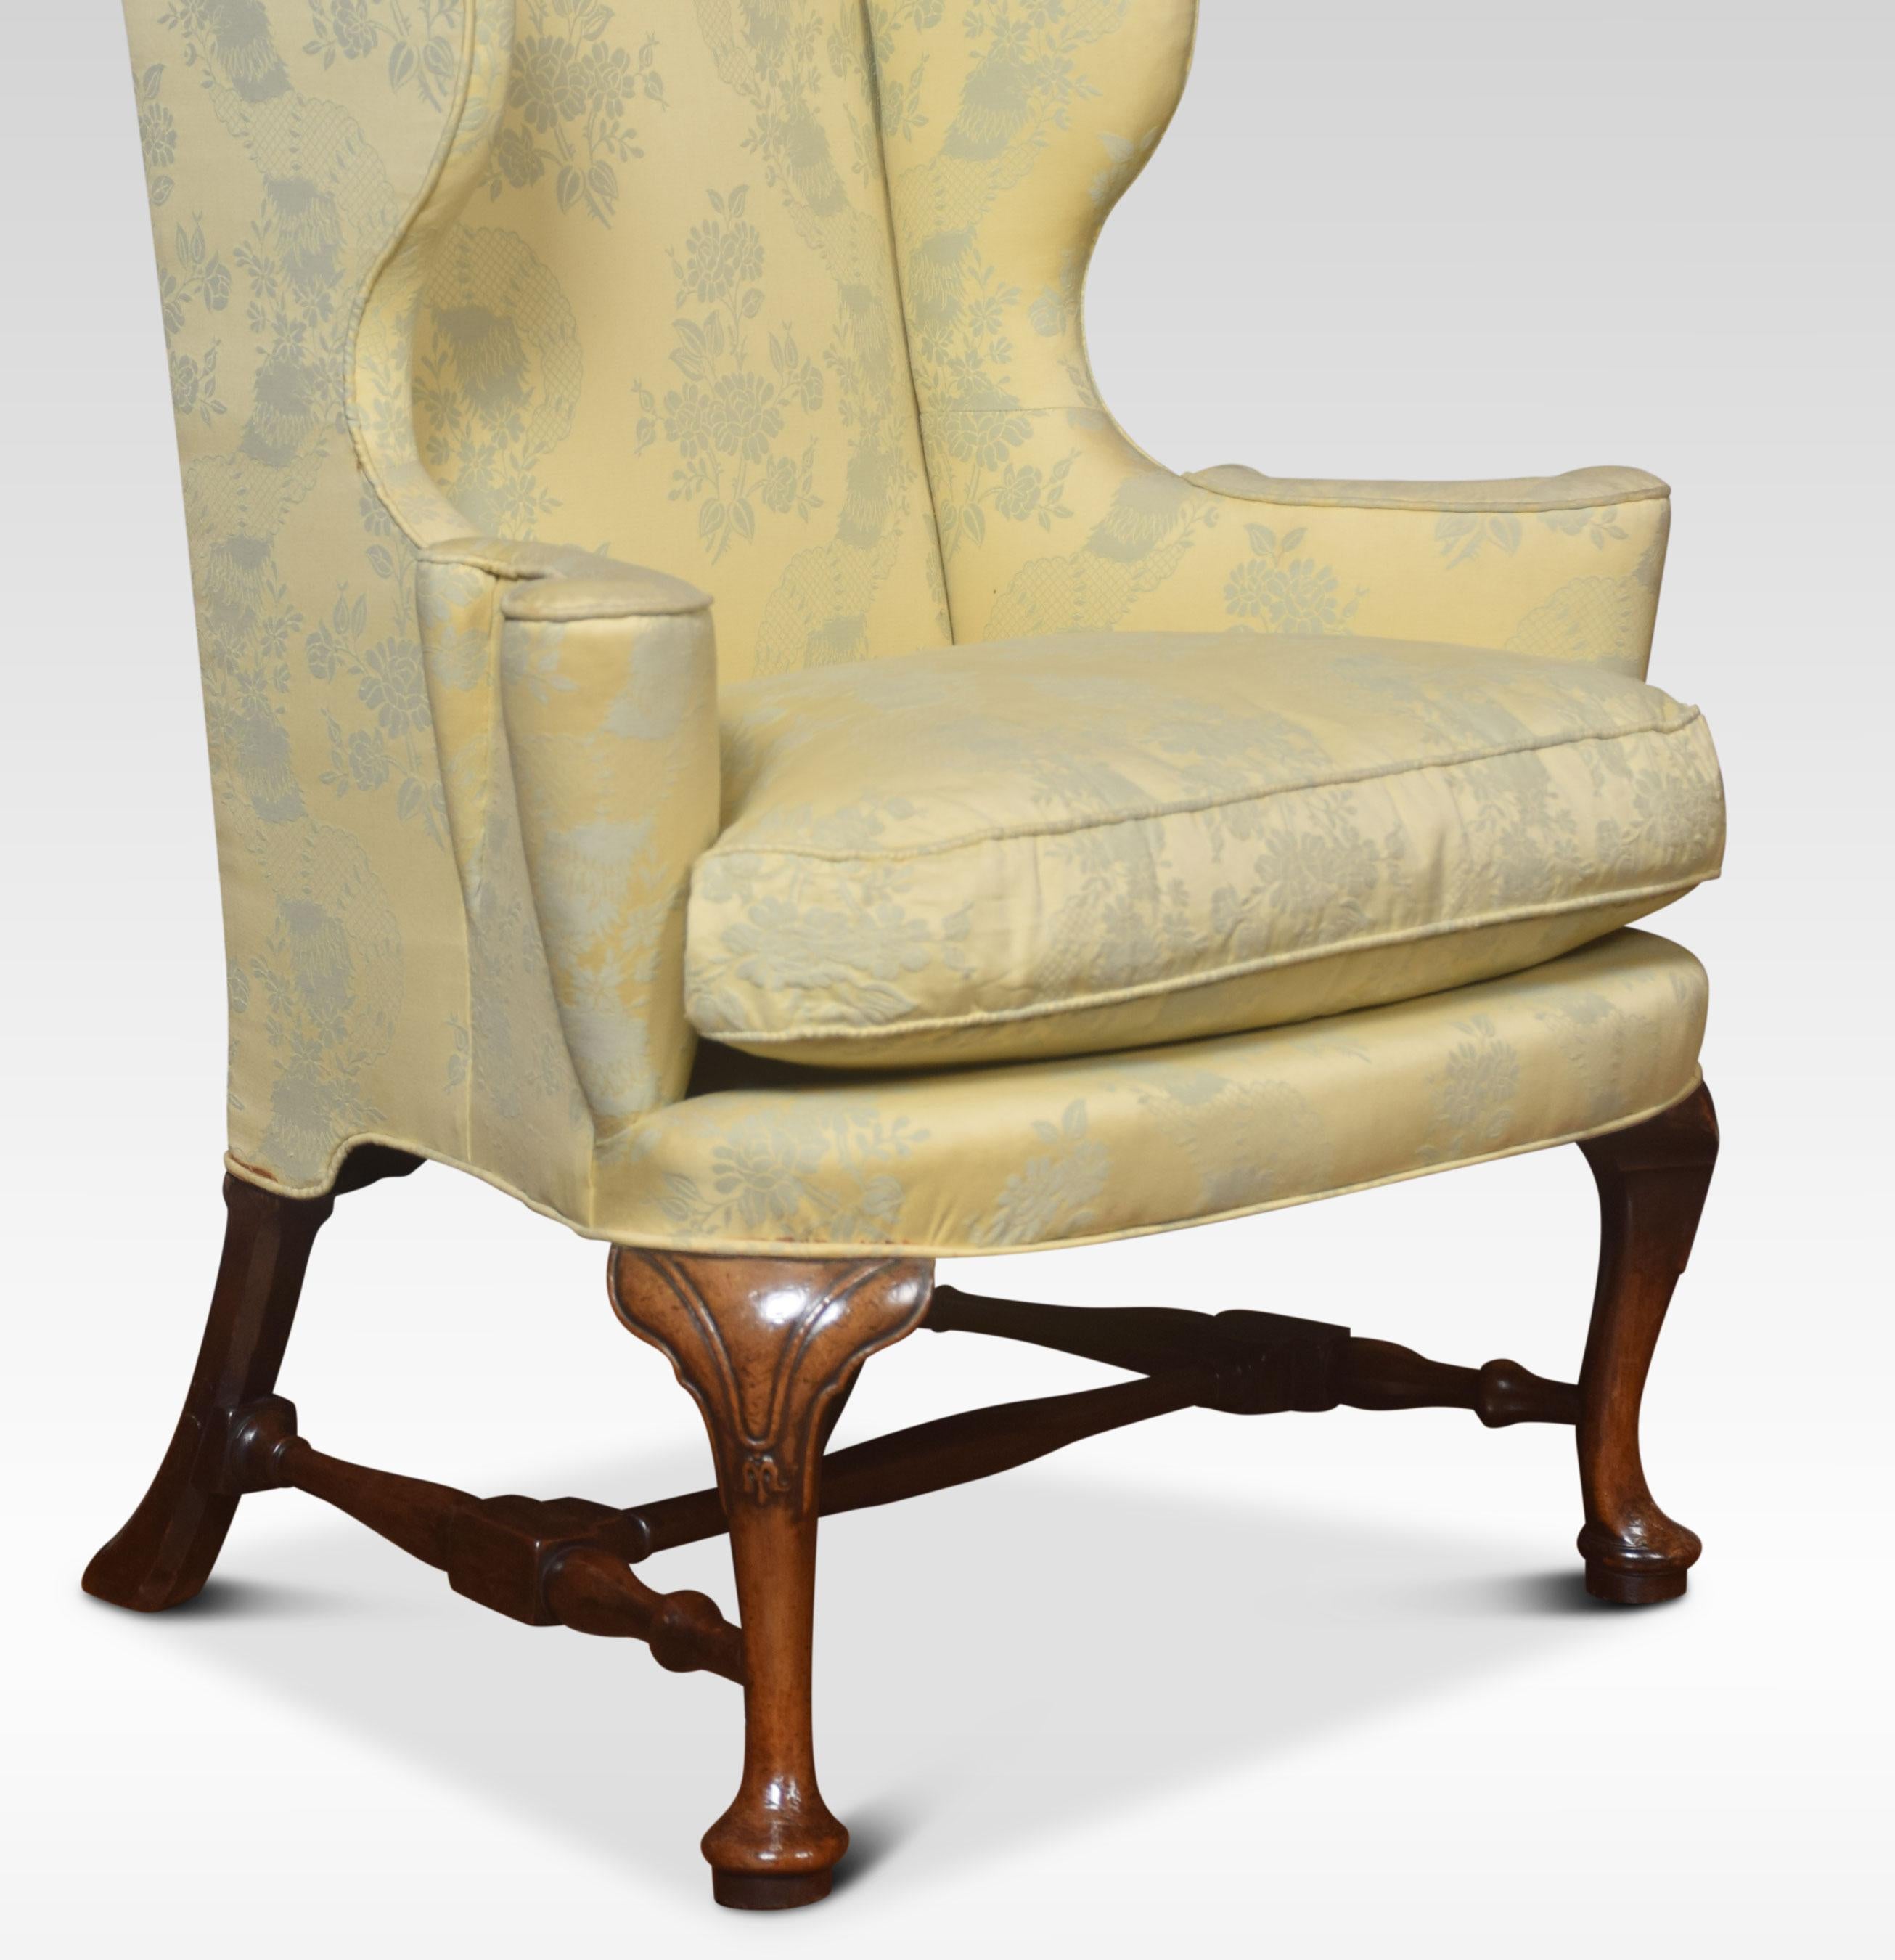 Queen Anne style wing armchair having walnut front carved cabriole legs, with swept legs to the rear united by stretcher. The wing armchair upholstered in damask upholstery having removable cushion.

Dimensions: 

Height 44 inches height to seat